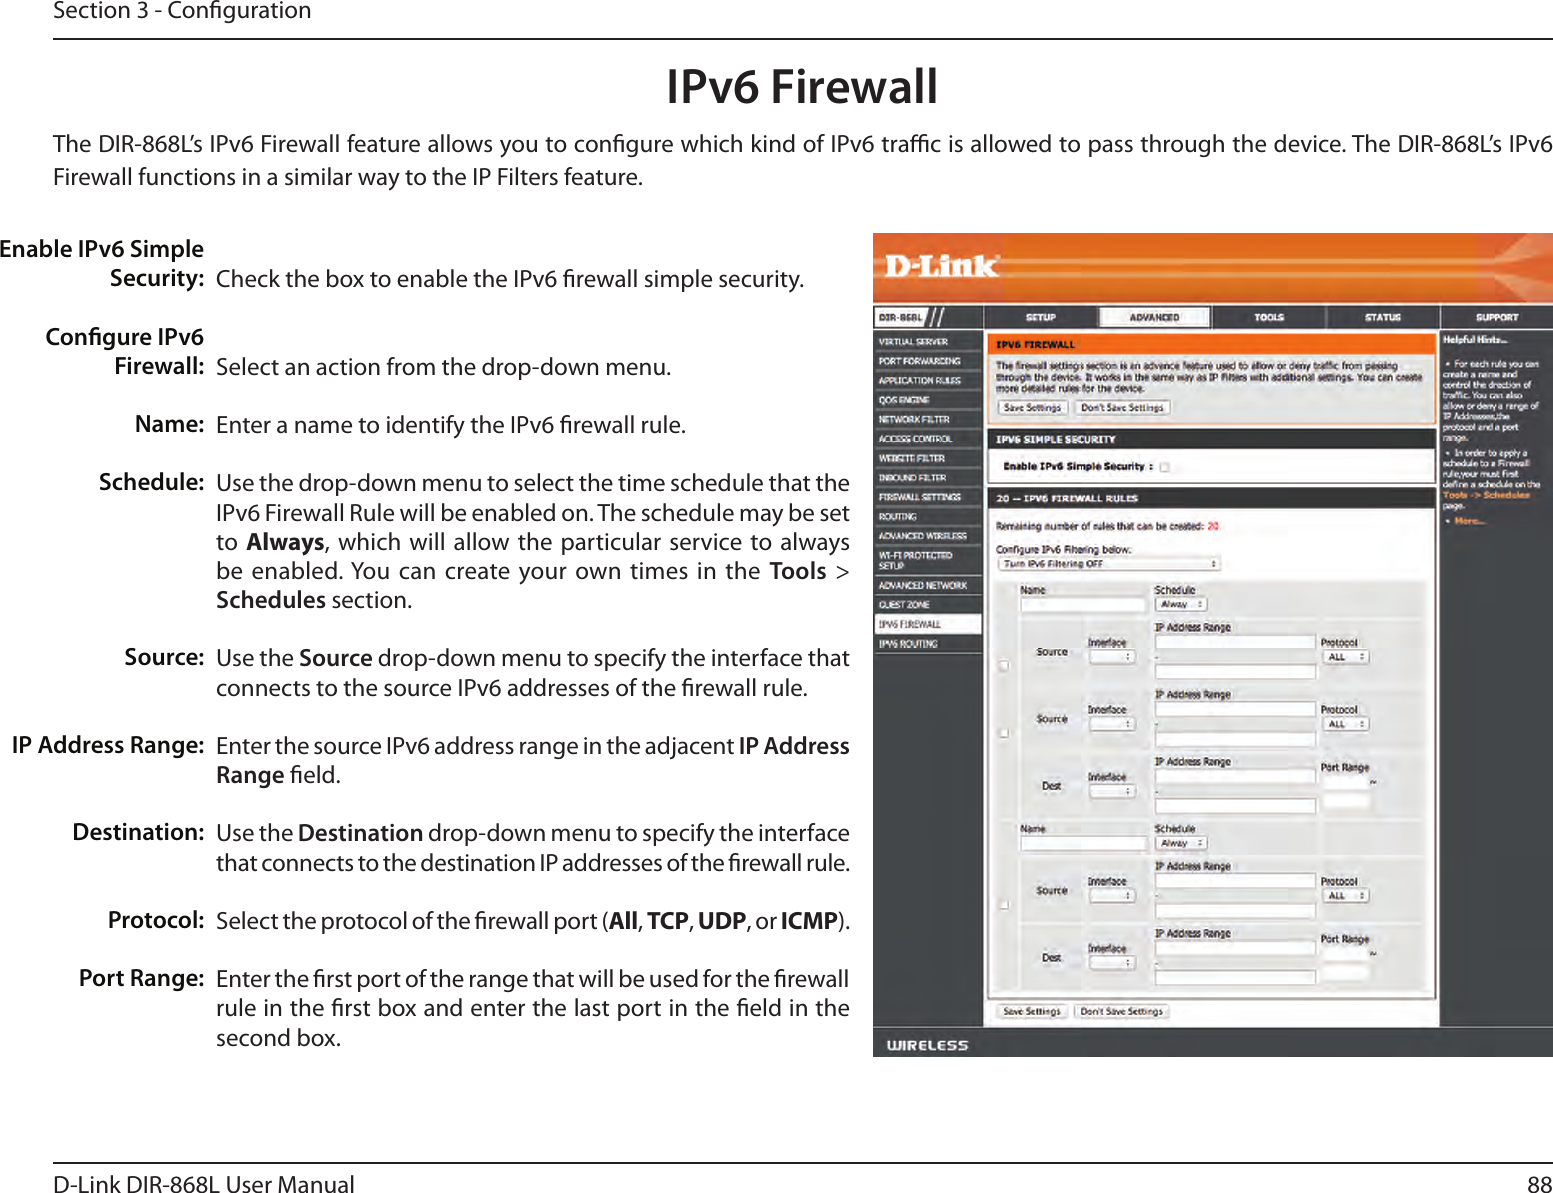 88D-Link DIR-868L User ManualSection 3 - CongurationIPv6 FirewallThe DIR-868L’s IPv6 Firewall feature allows you to congure which kind of IPv6 trac is allowed to pass through the device. The DIR-868L’s IPv6 Firewall functions in a similar way to the IP Filters feature.Check the box to enable the IPv6 rewall simple security.Select an action from the drop-down menu.Enter a name to identify the IPv6 rewall rule.Use the drop-down menu to select the time schedule that the IPv6 Firewall Rule will be enabled on. The schedule may be set to Always, which  will  allow the particular  service to always be enabled. You can  create your own times in  the  Tools  &gt; Schedules section. Use the Source drop-down menu to specify the interface that connects to the source IPv6 addresses of the rewall rule. Enter the source IPv6 address range in the adjacent IP Address Range eld.Use the Destination drop-down menu to specify the interface that connects to the destination IP addresses of the rewall rule. Select the protocol of the rewall port (All, TCP, UDP, or ICMP).Enter the rst port of the range that will be used for the rewall rule in the rst box and enter the last port in the eld in the second box.Enable IPv6 Simple  Security:Congure IPv6 Firewall:Name:Schedule:Source:IP Address Range:Destination:Protocol:Port Range: